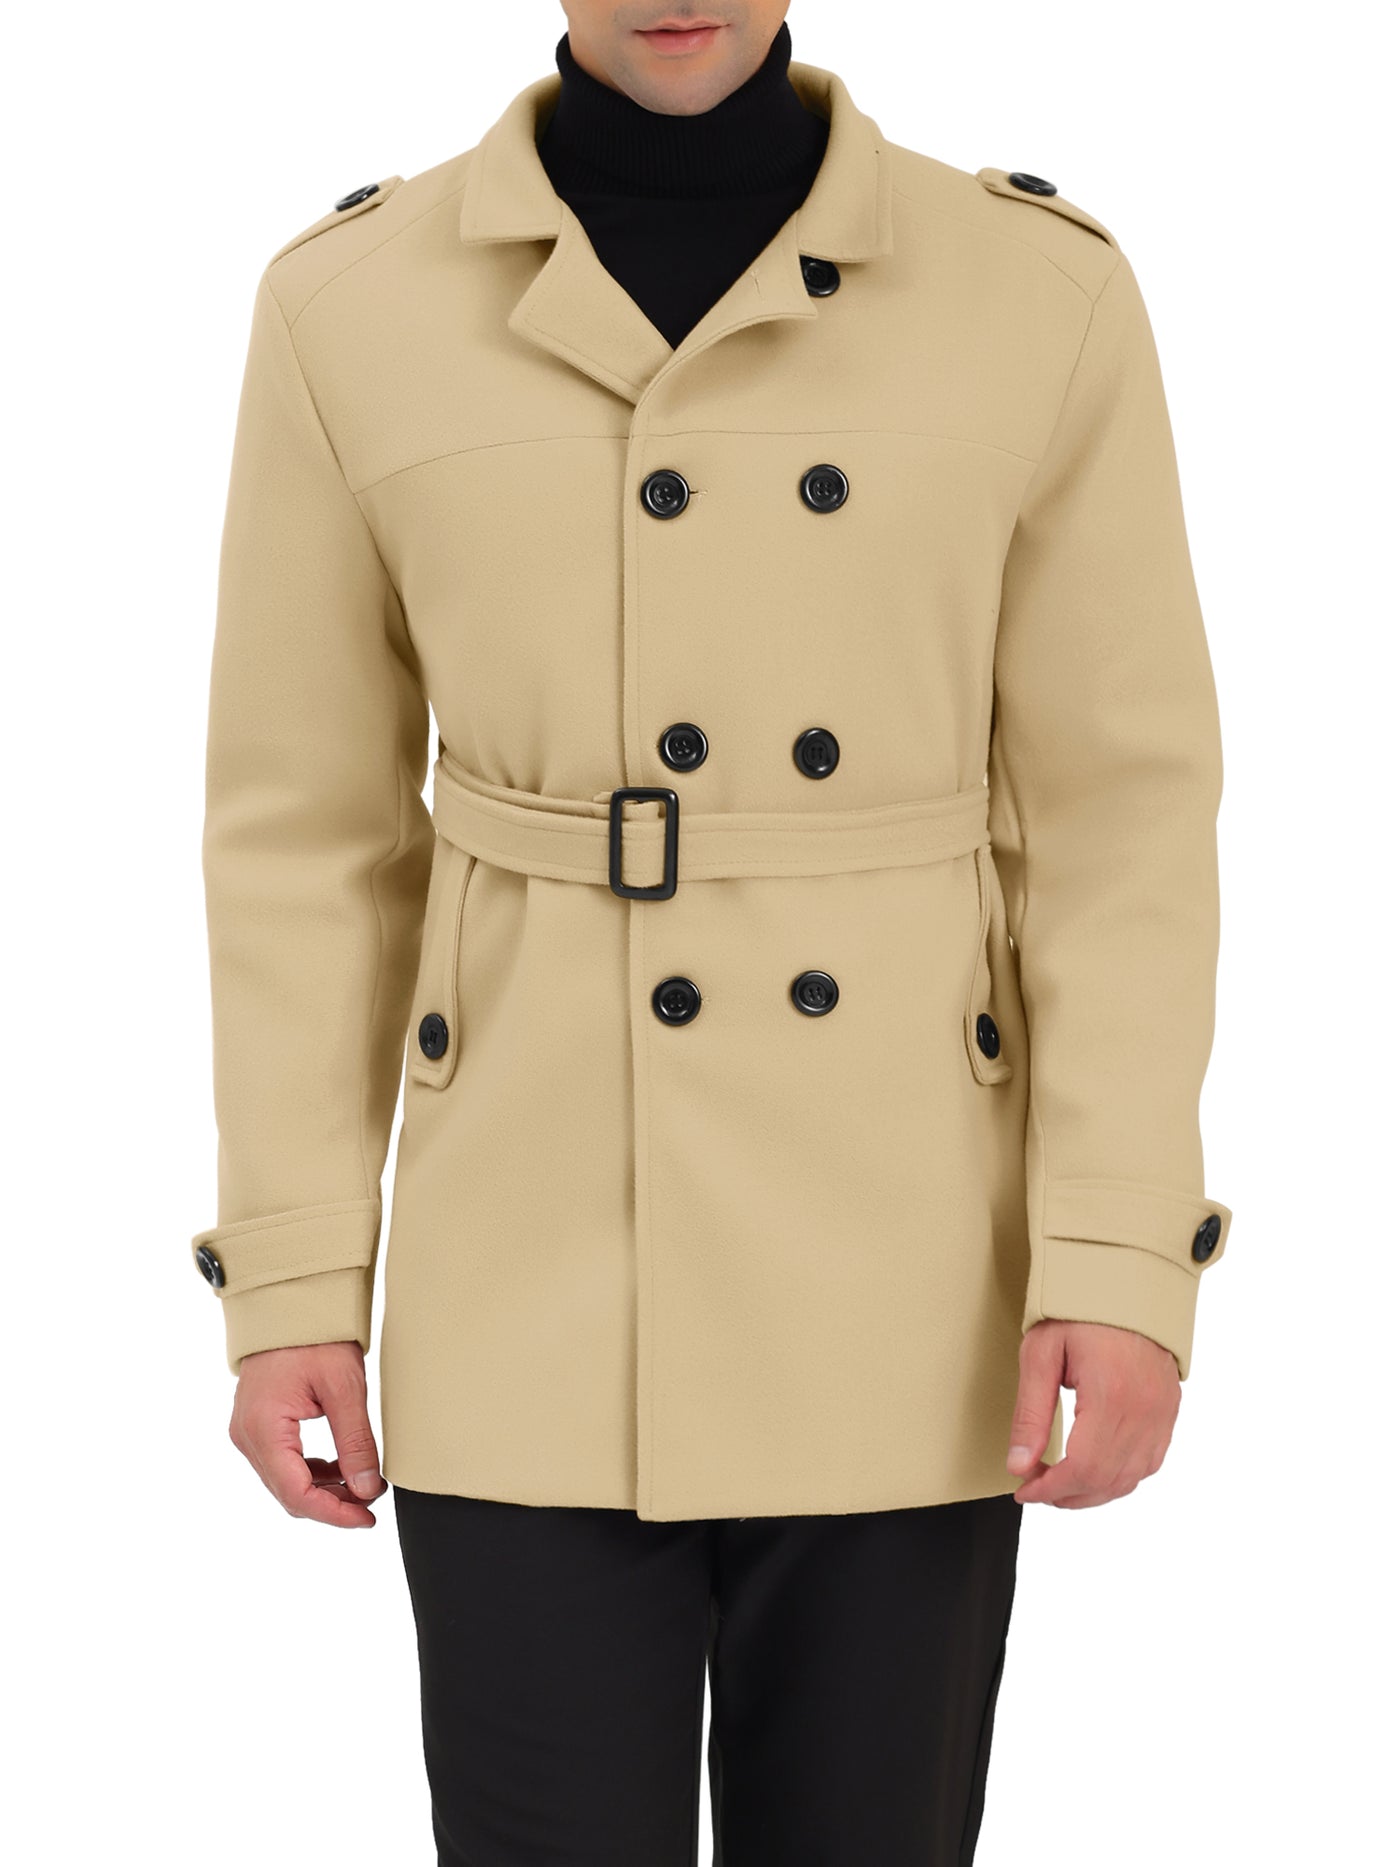 Bublédon Men's Overcoat Slim Fit Double Breasted Notch Lapel Trench Coat with Belt